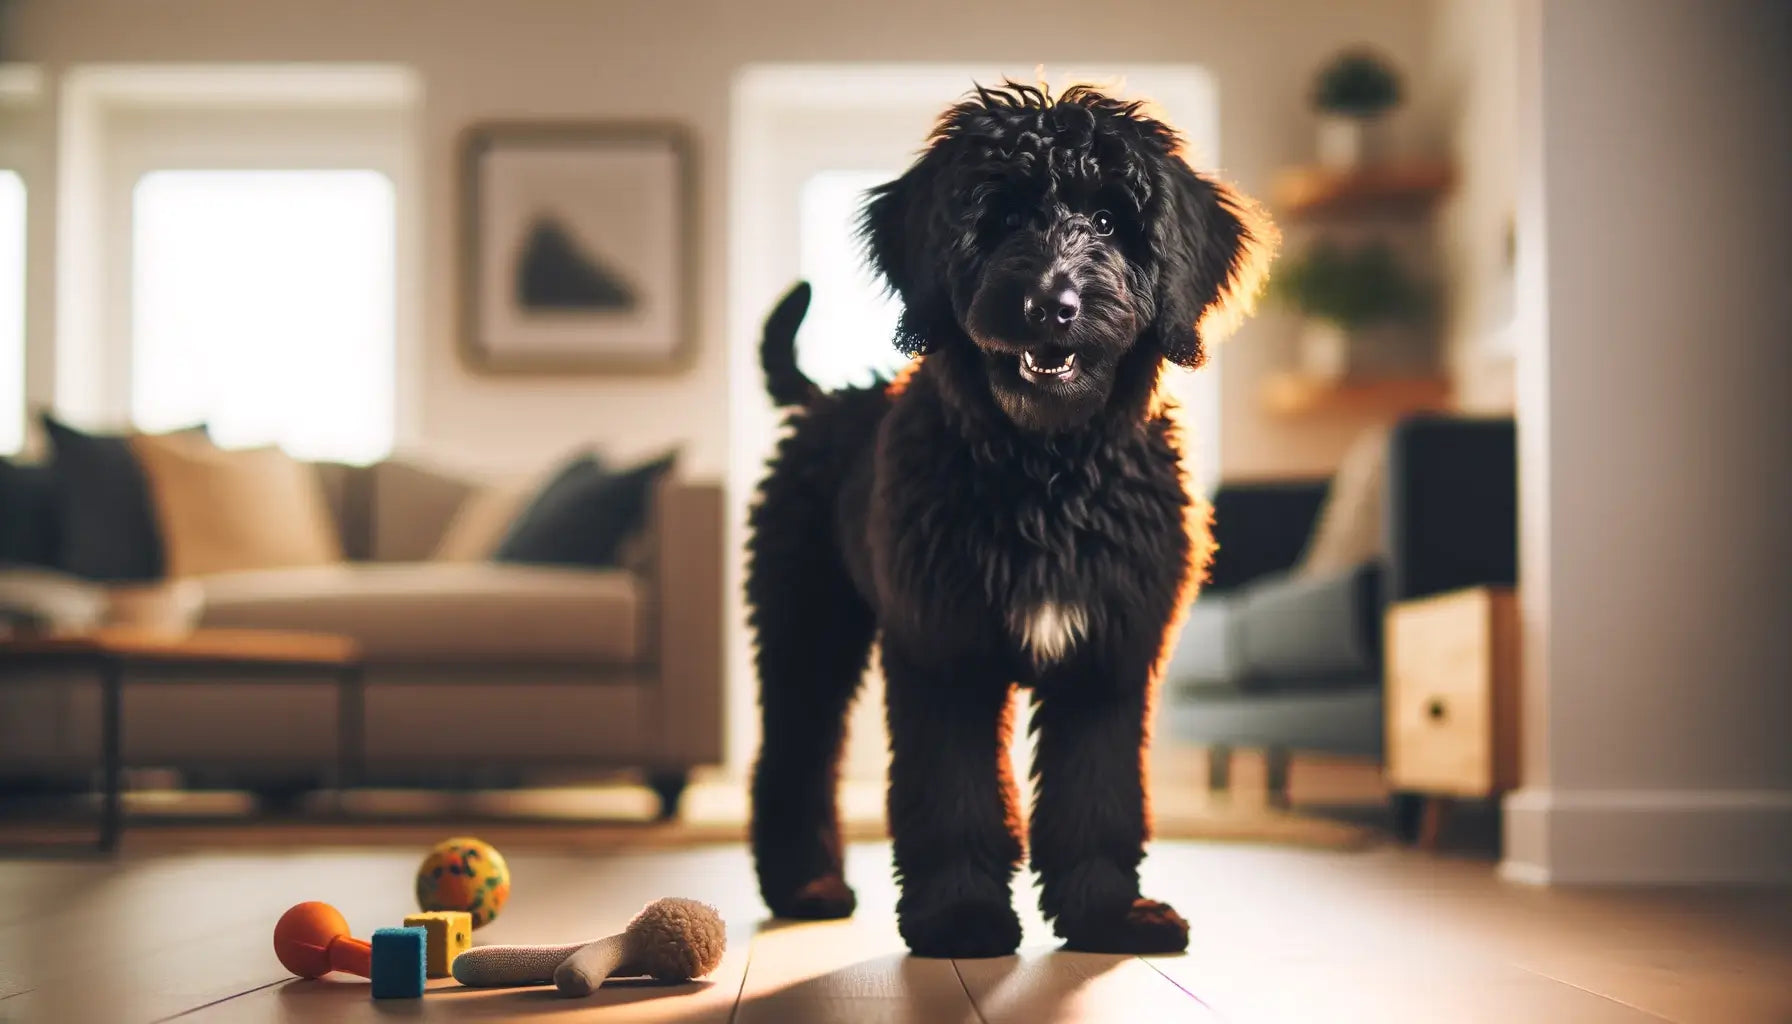 Black Goldendoodle standing indoors with a playful stance, its coat appearing fluffy and its eyes bright with curiosity.